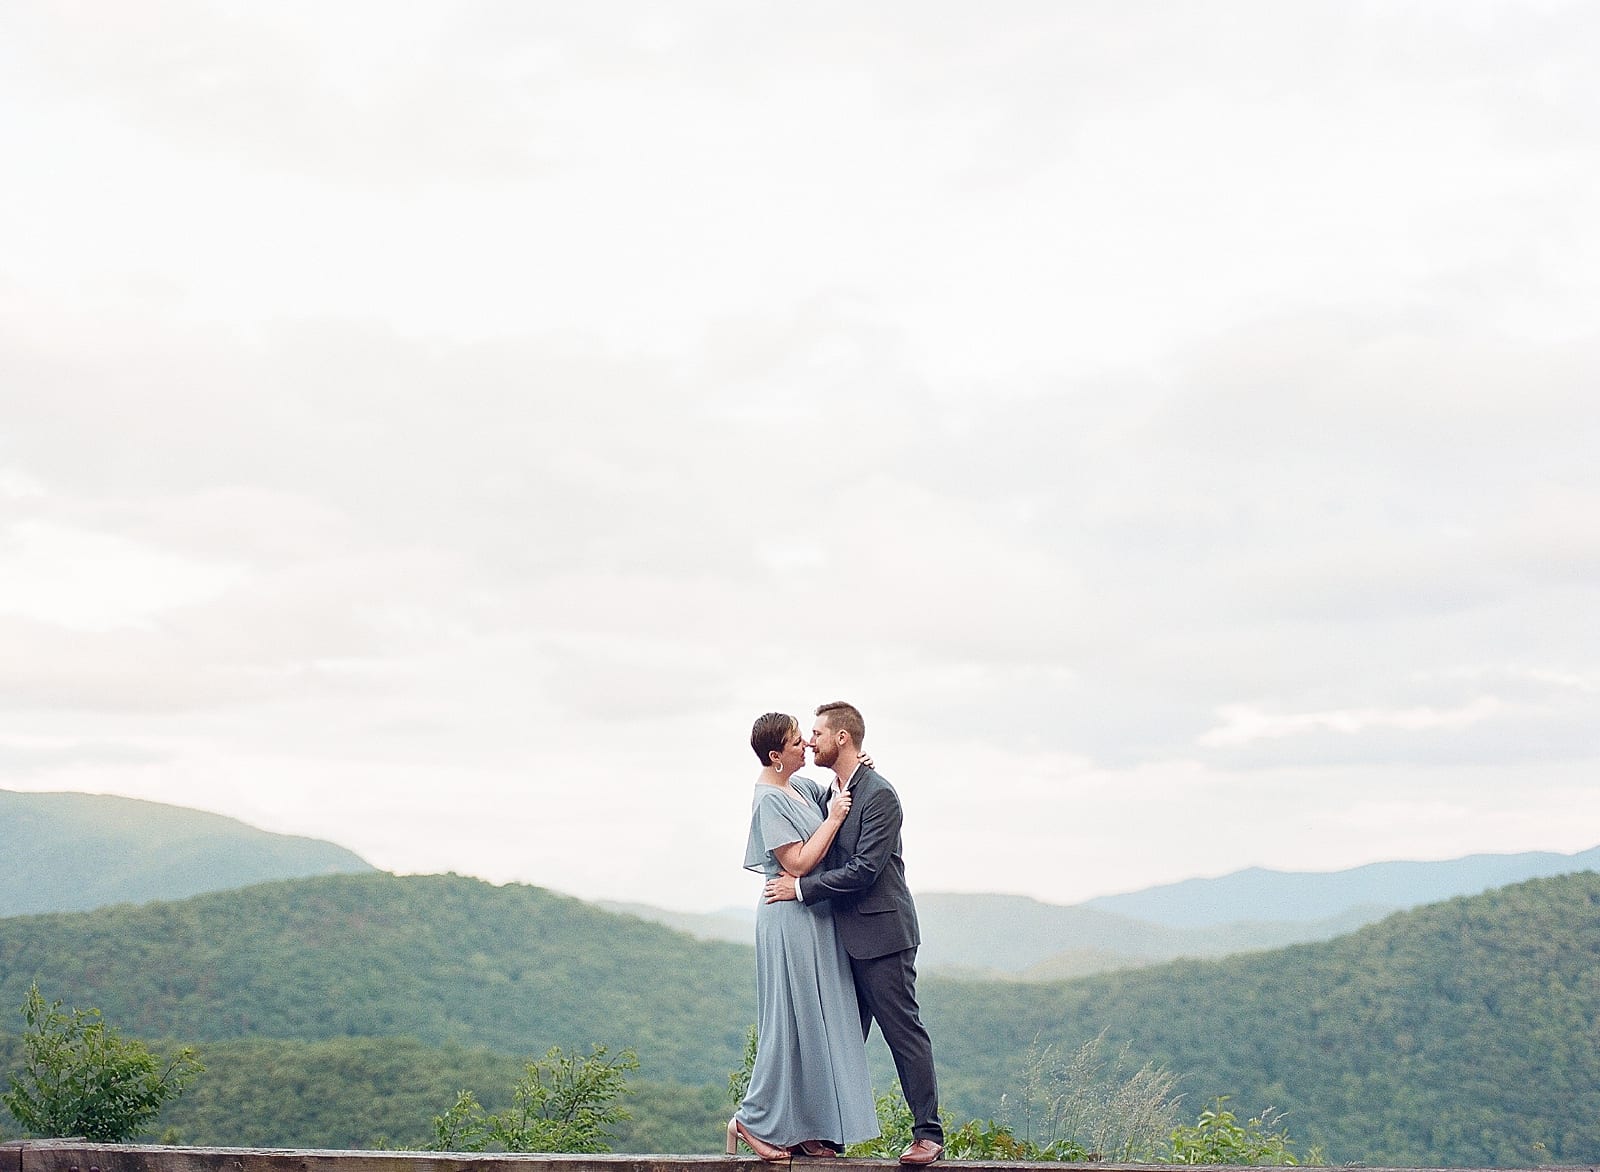 Blue Ridge Parkway North Carolina Couple Hugging in front of Mountains Photo